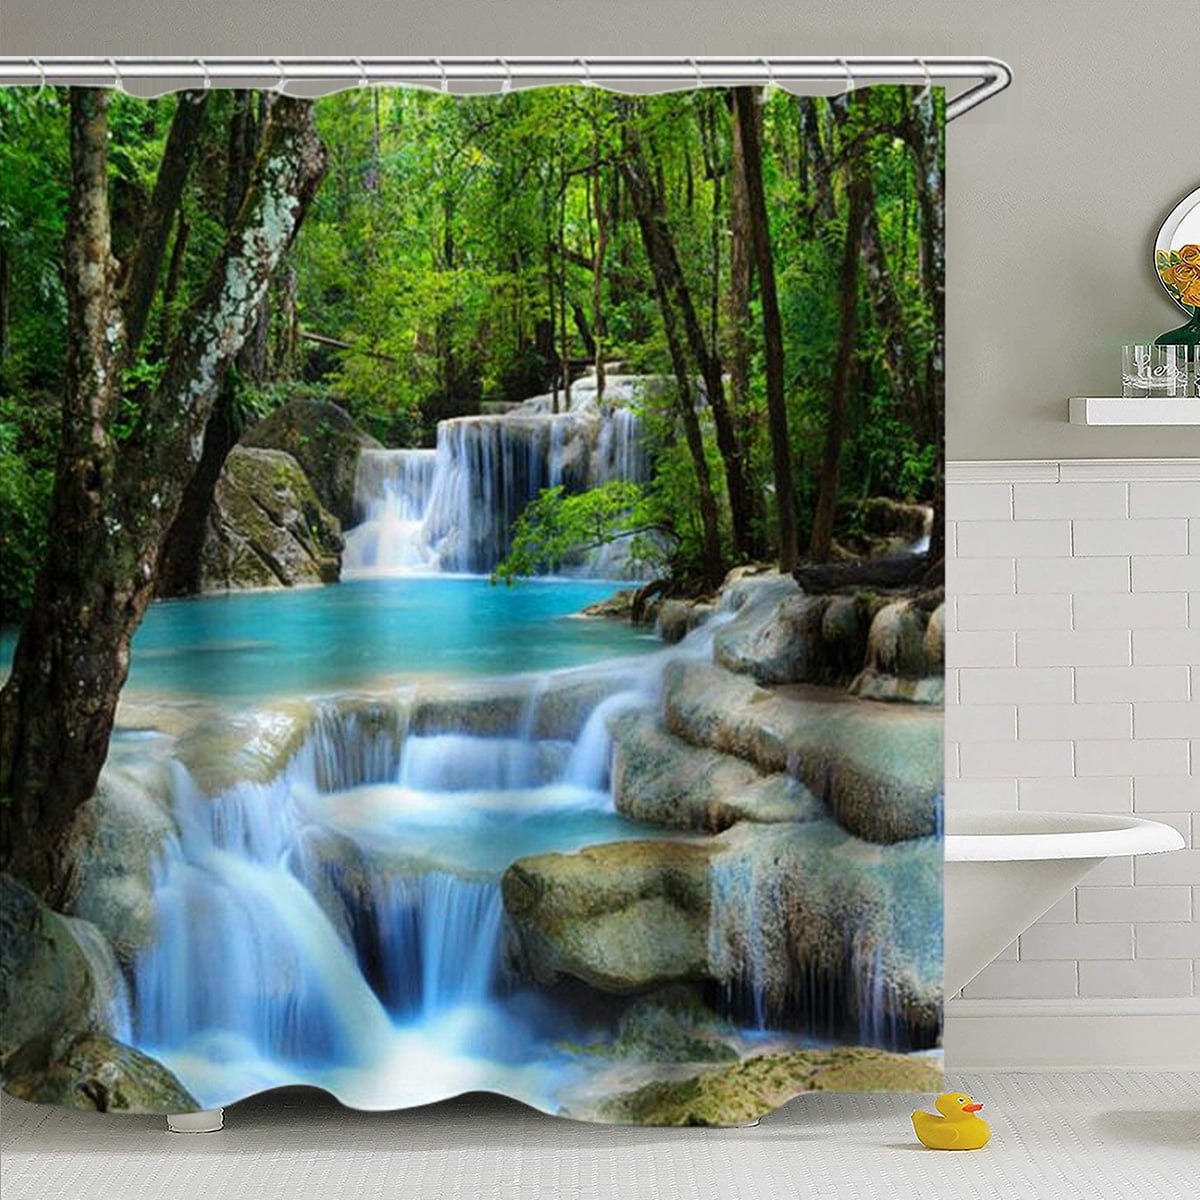 Forest Small River Landscape Bathroom Waterproof Fabric Shower Curtain 12 Hooks 